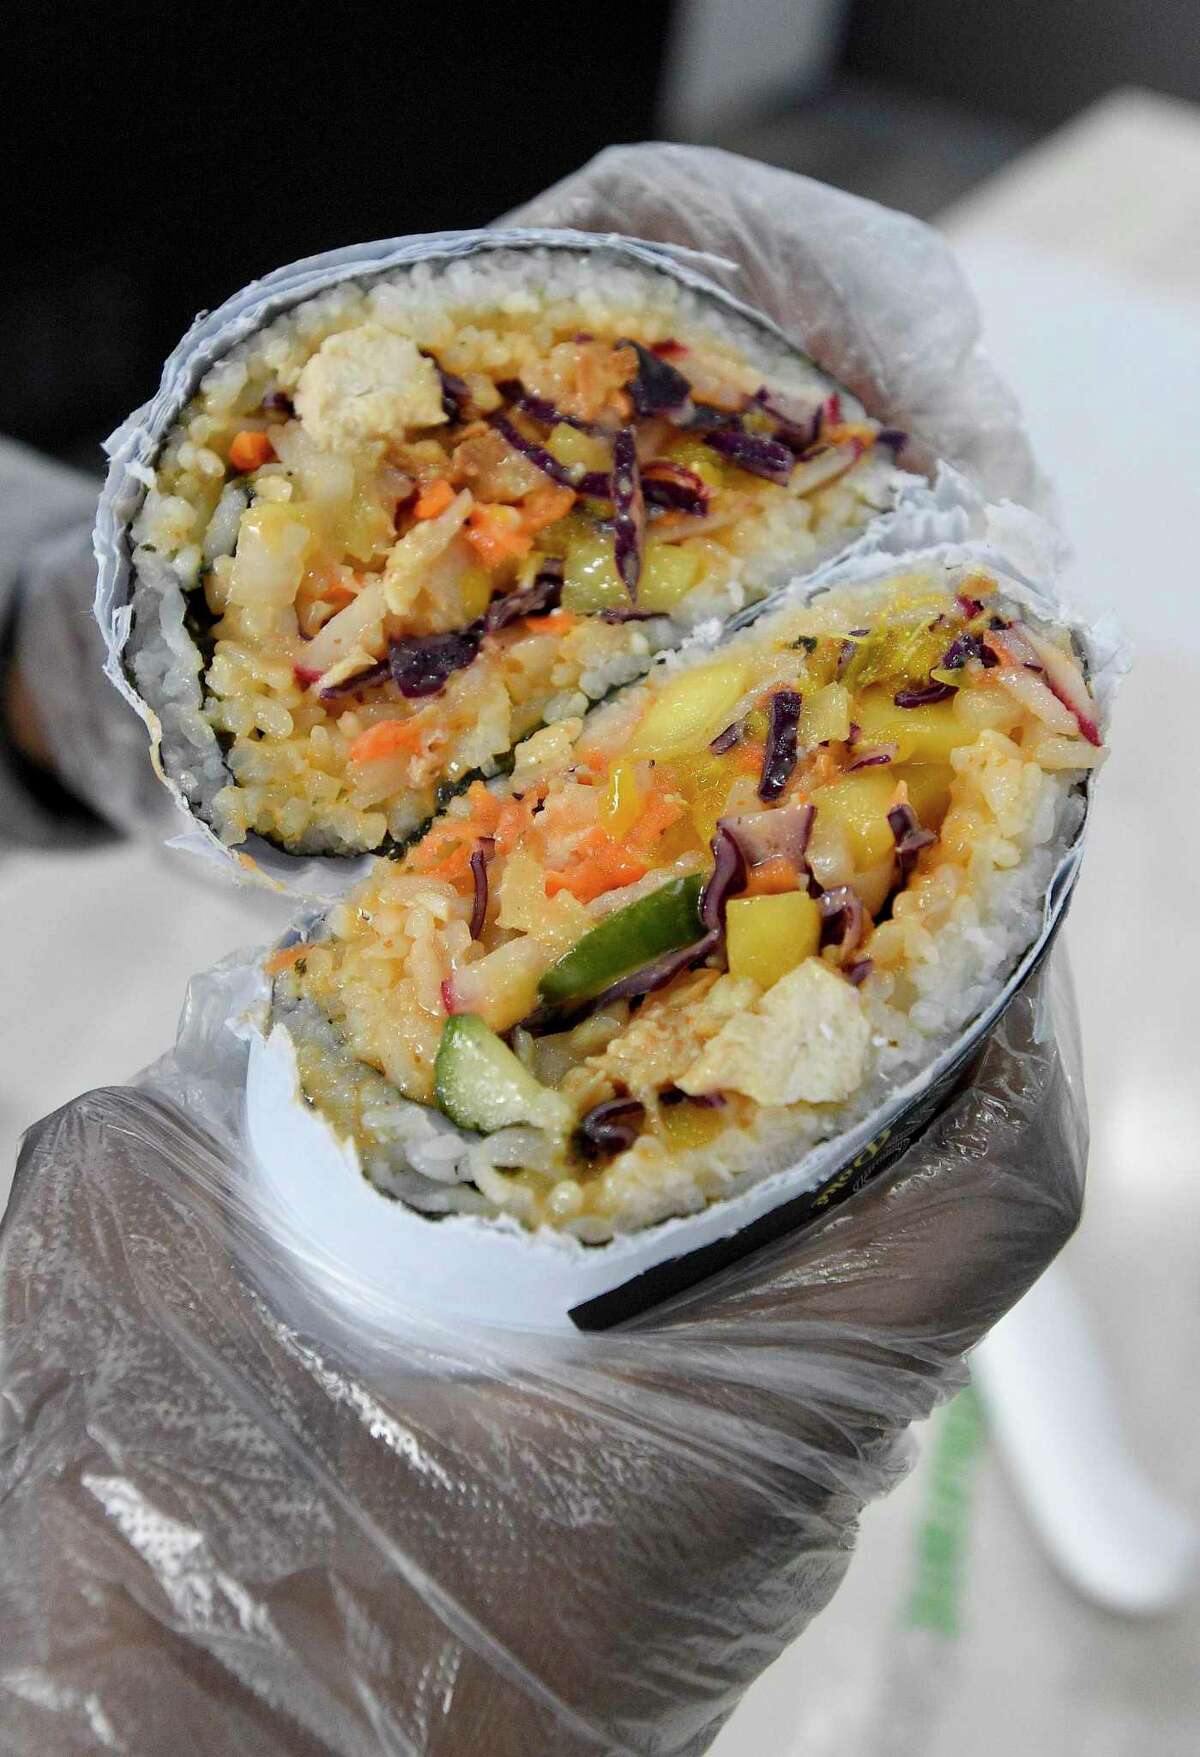 A poke burrito is displayed at Pokemoto on 229 Main St., in downtown Stamford, Conn., on Feb. 19, 2020.